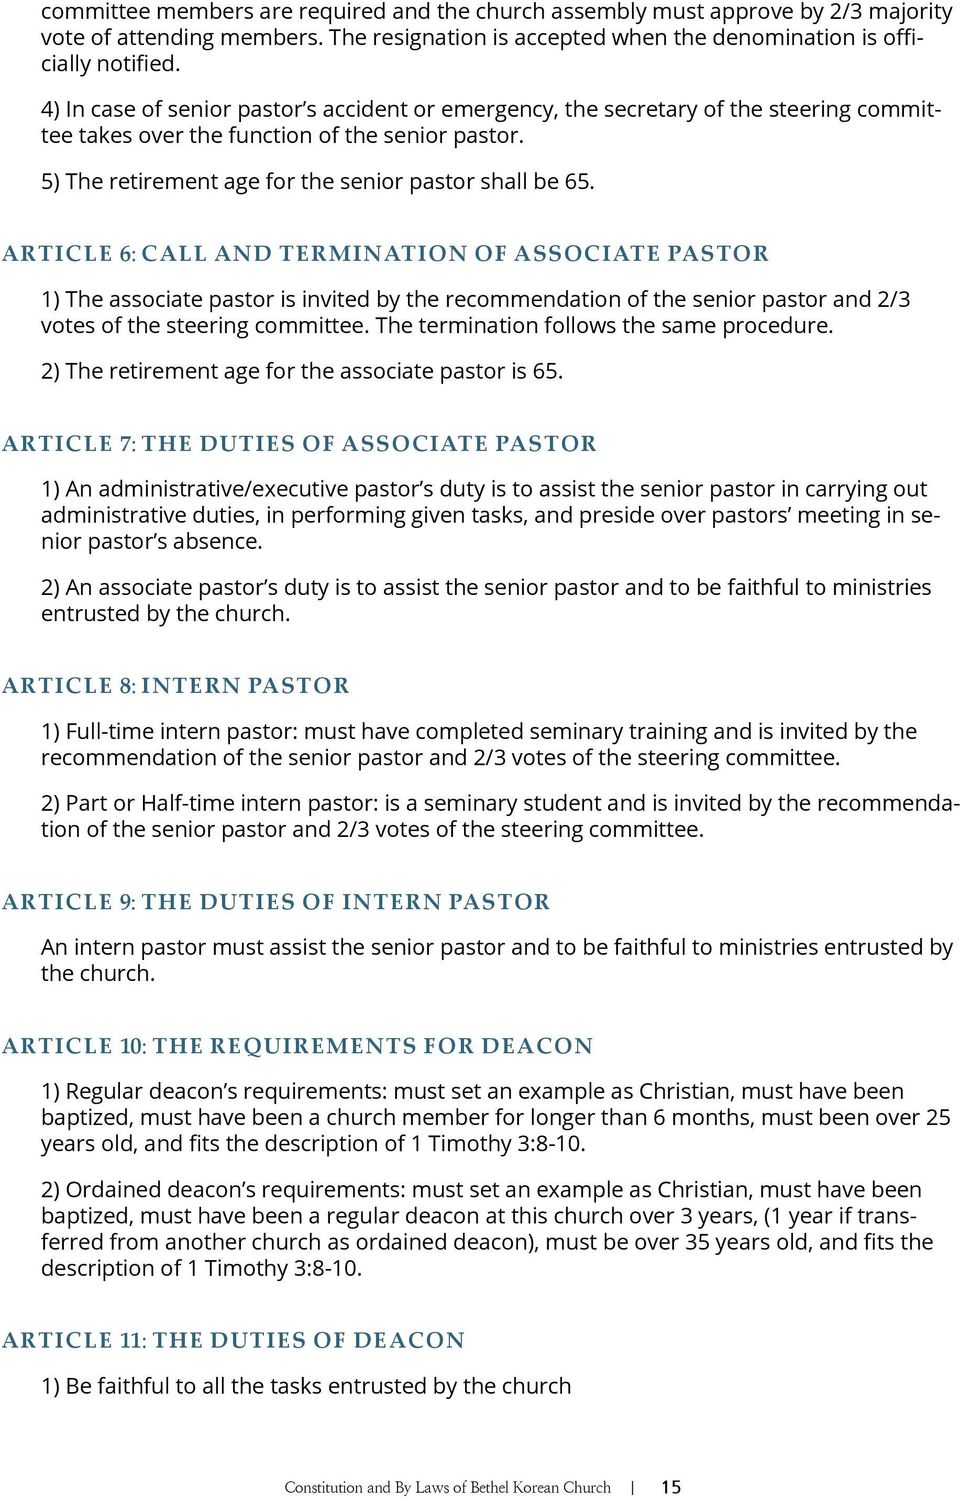 Article 6: Call and Termination of Associate Pastor 1) The associate pastor is invited by the recommendation of the senior pastor and 2/3 votes of the steering committee.